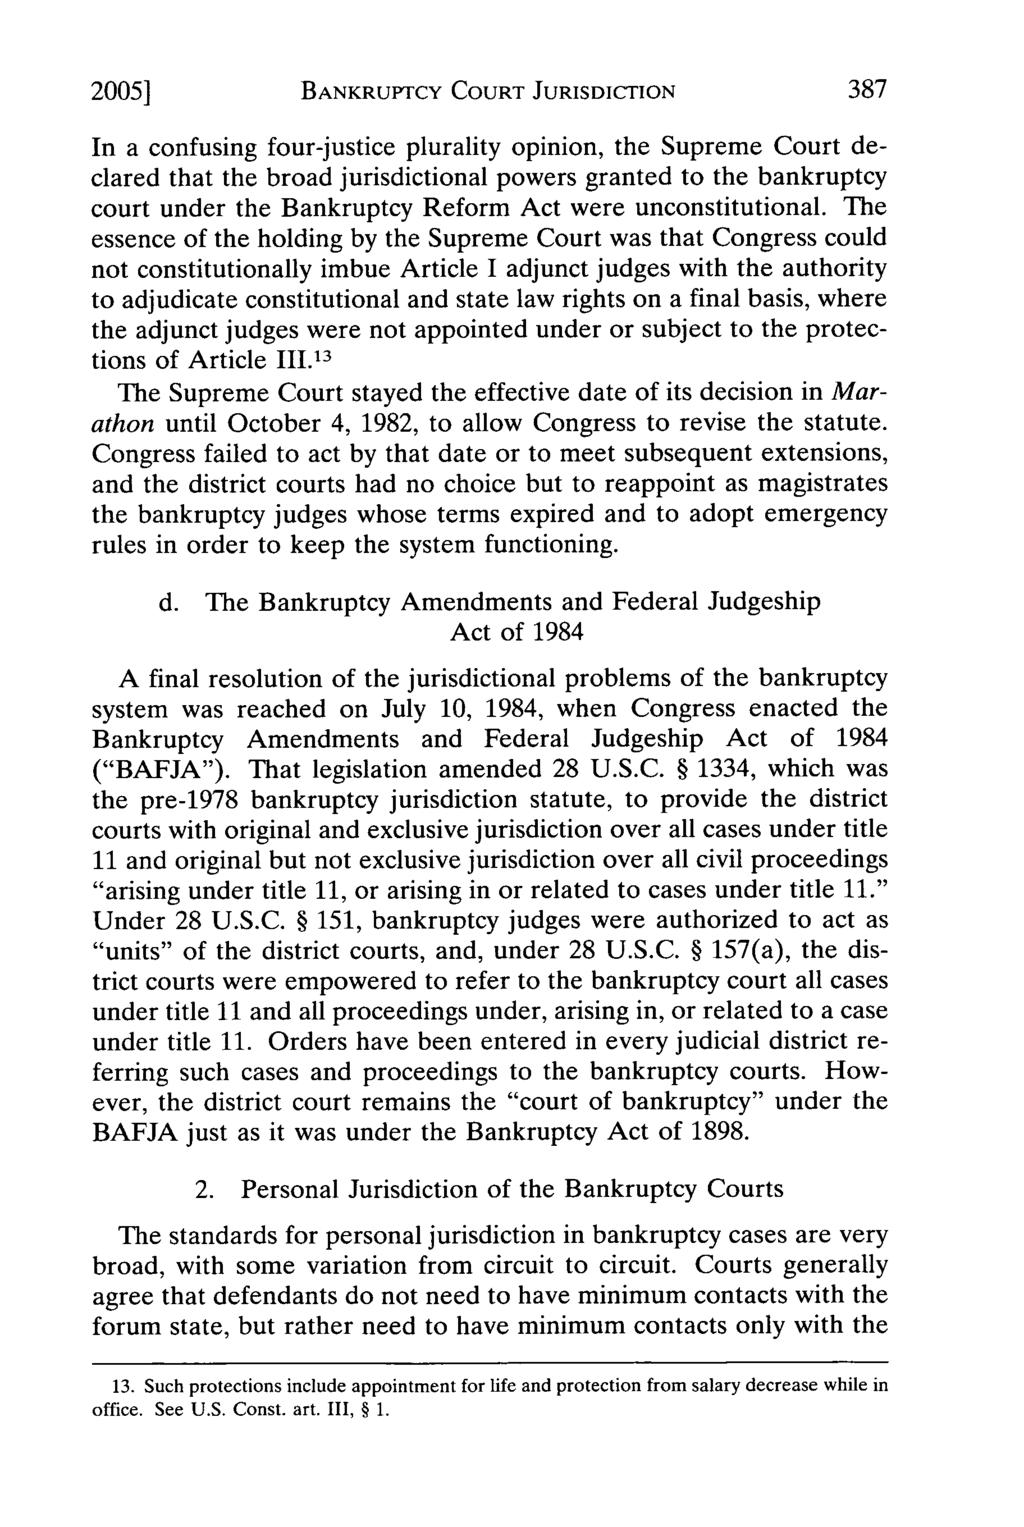 2005] BANKRUPTCY COURT JURISDICTION In a confusing four-justice plurality opinion, the Supreme Court declared that the broad jurisdictional powers granted to the bankruptcy court under the Bankruptcy